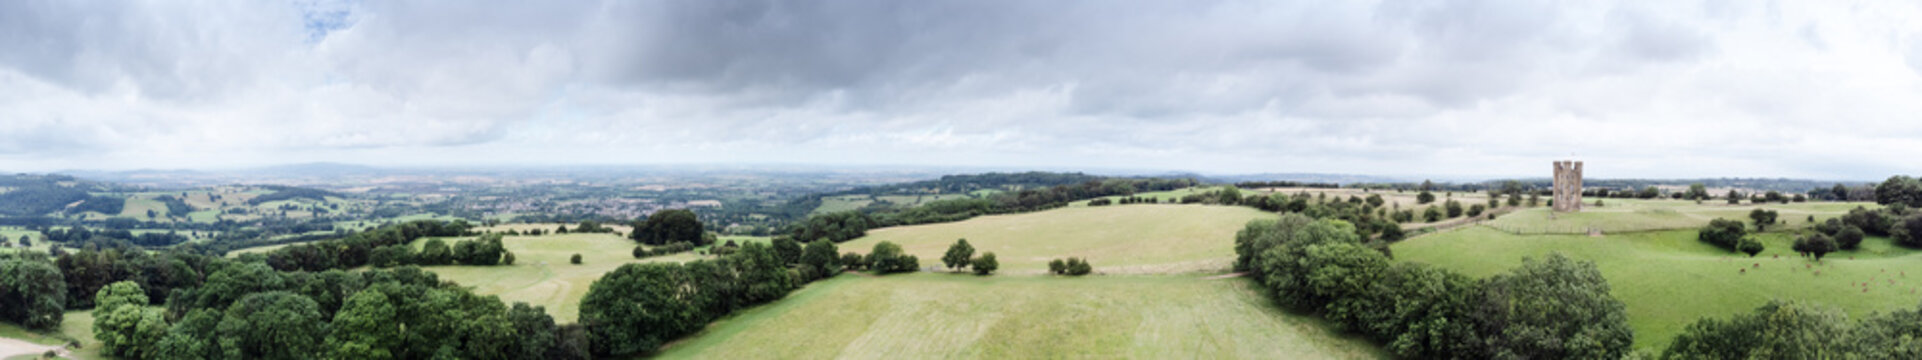 landscape image from the air of Broadway Tower